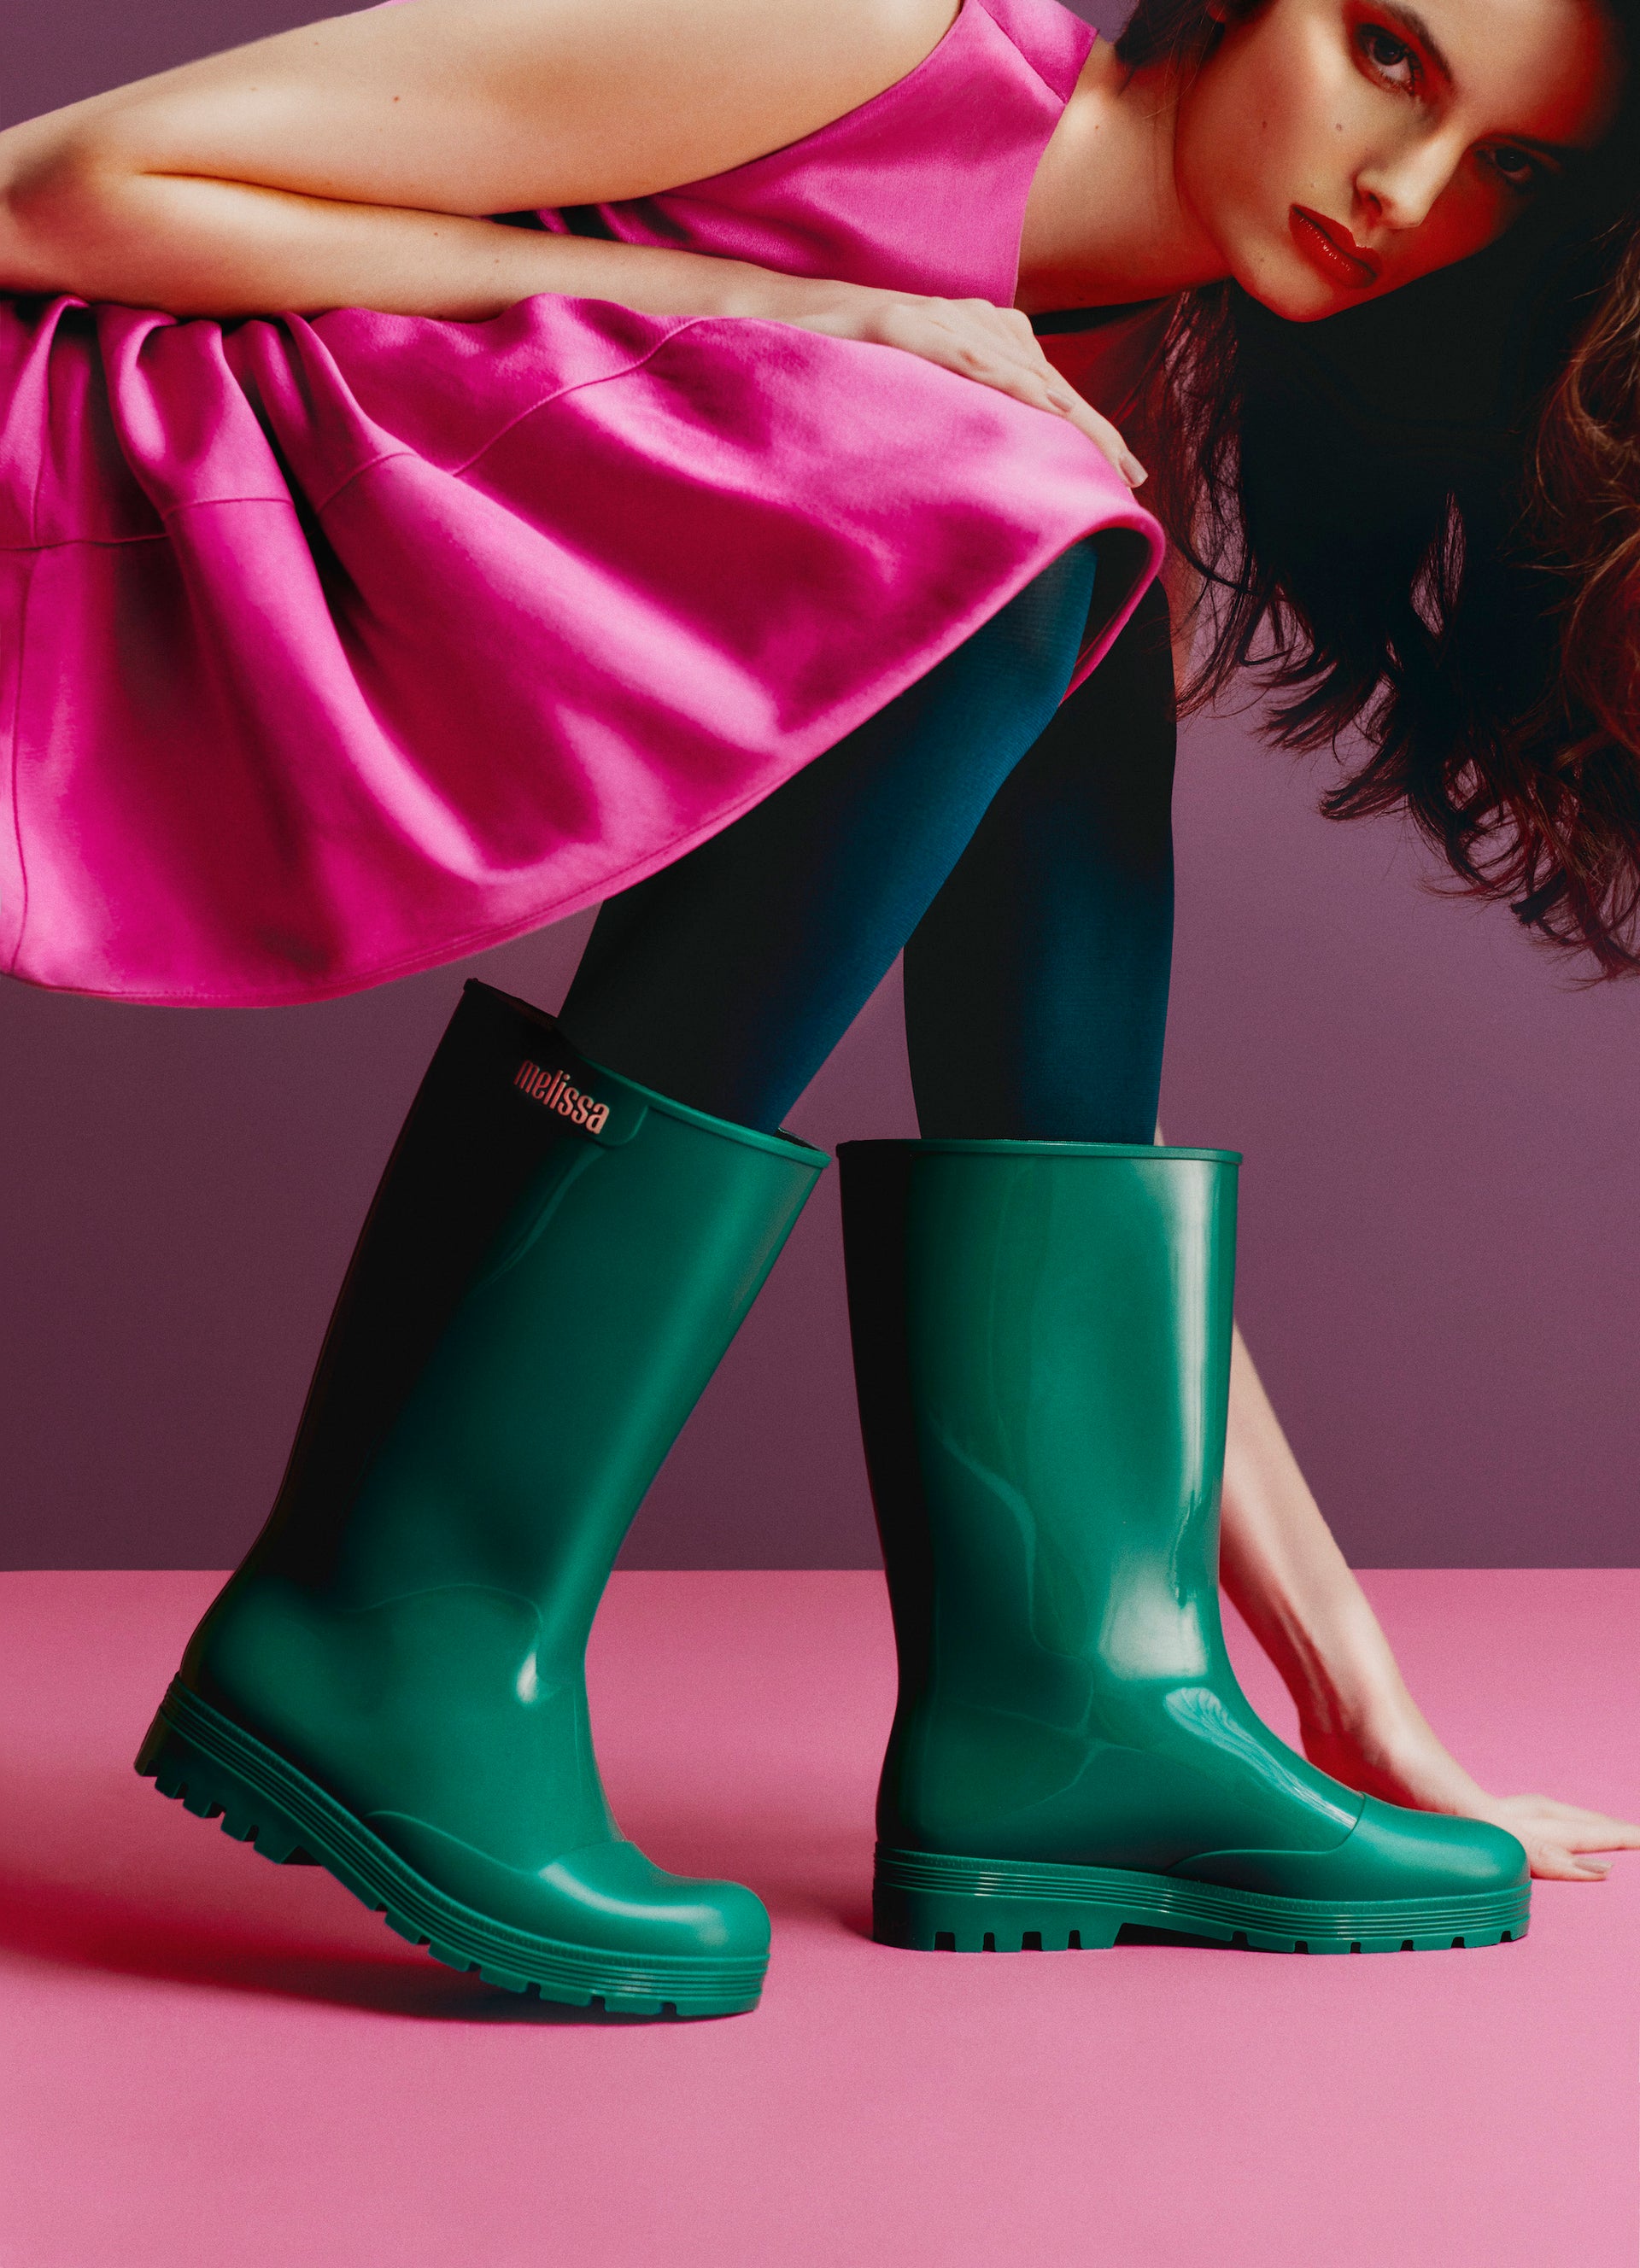 Model wearing the Green Welly Rain Boots